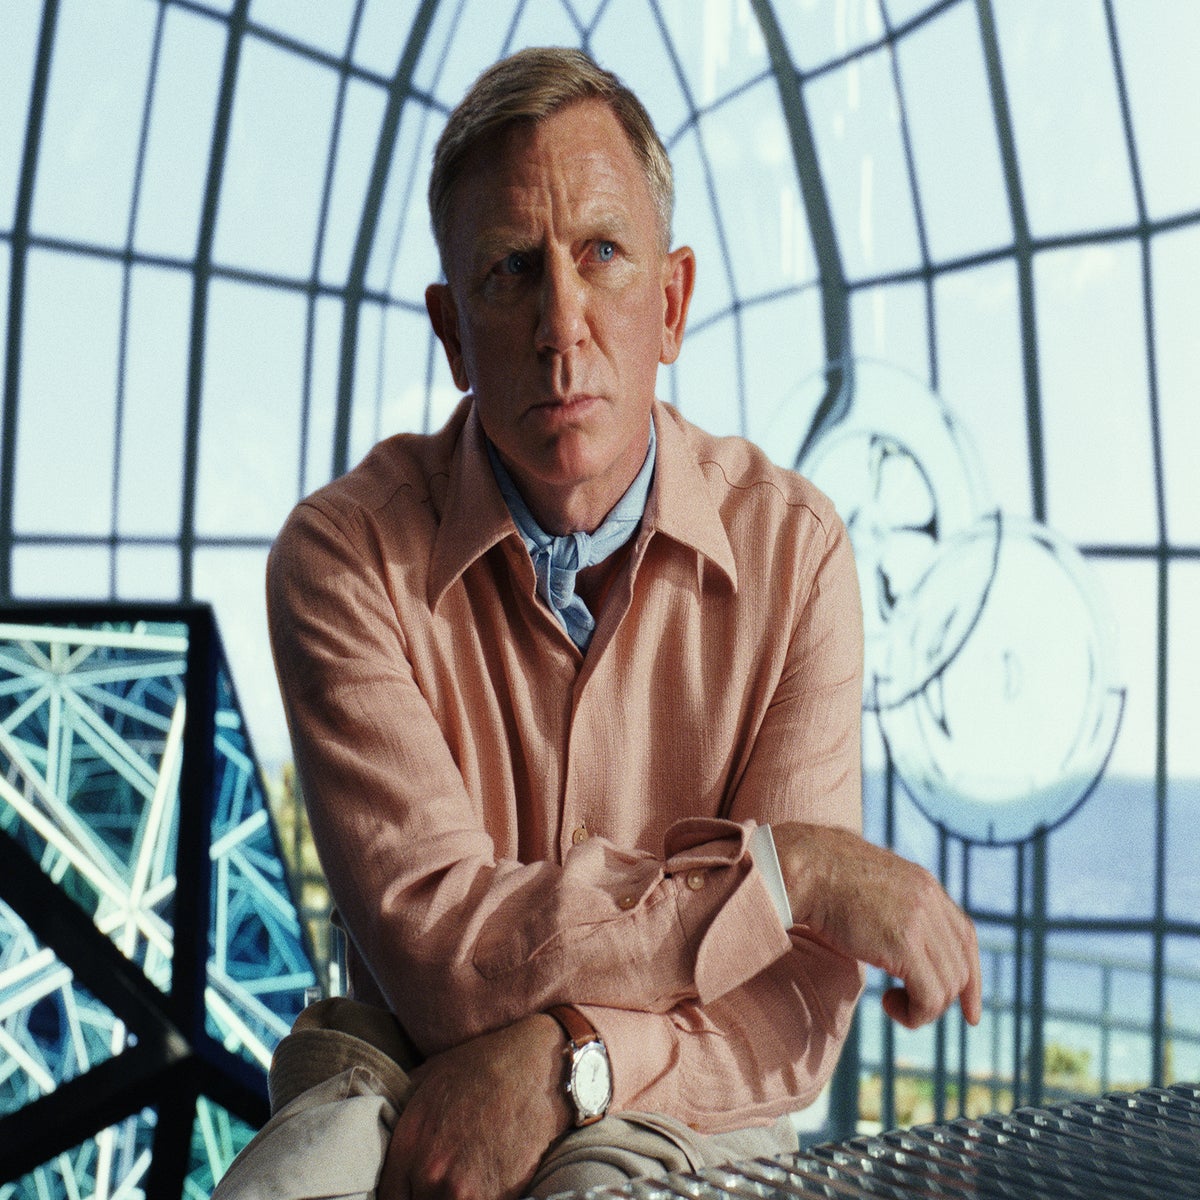 Daniel Craig's Belvedere Vodka Ad Is a State-of-the-Art Image Shift